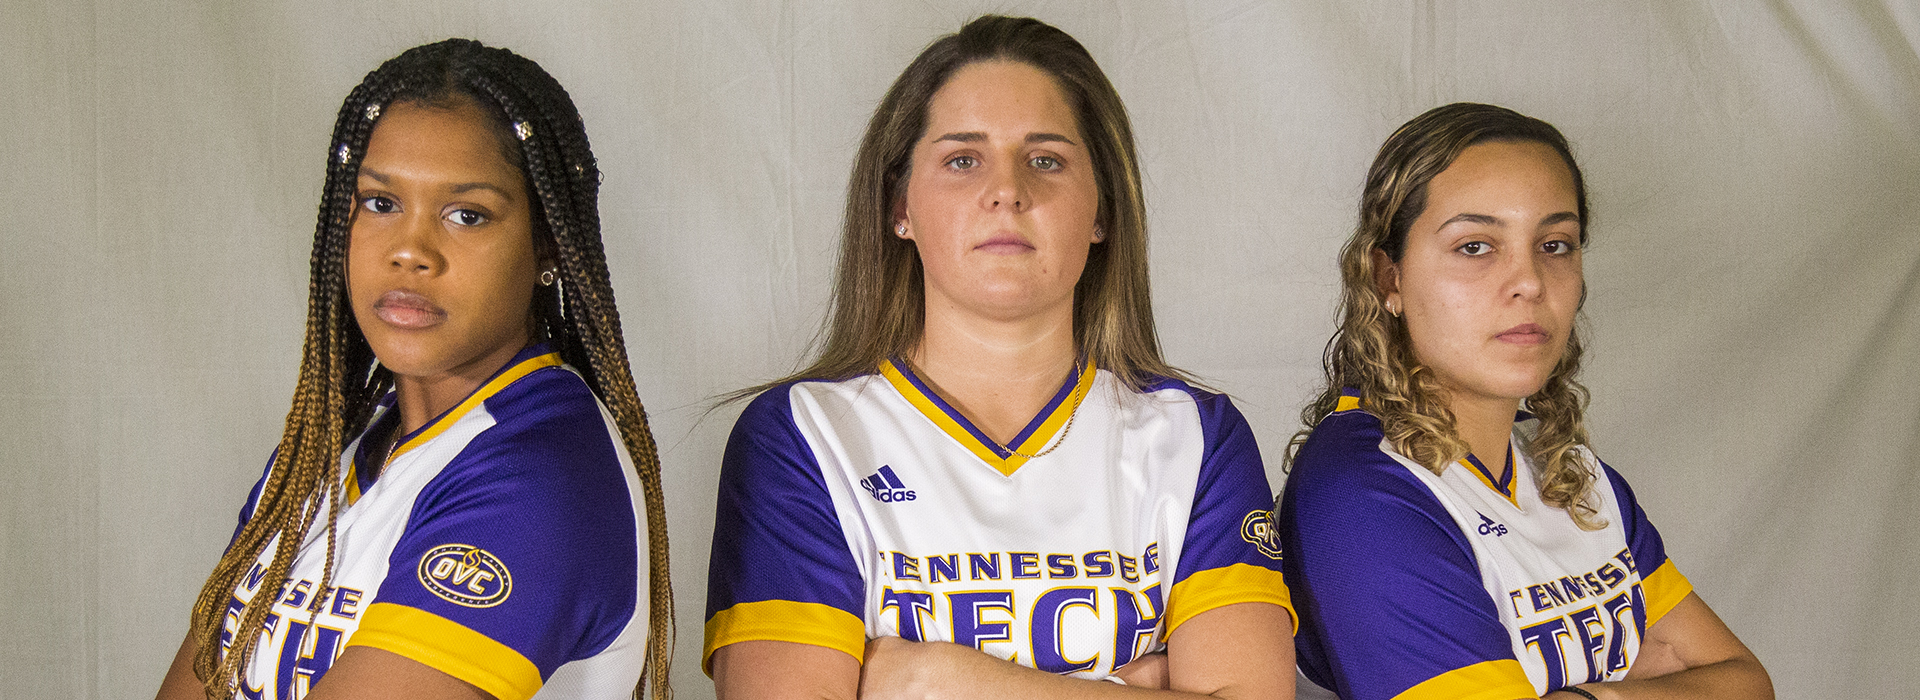 Tech softball travels to ETSU for weekend series